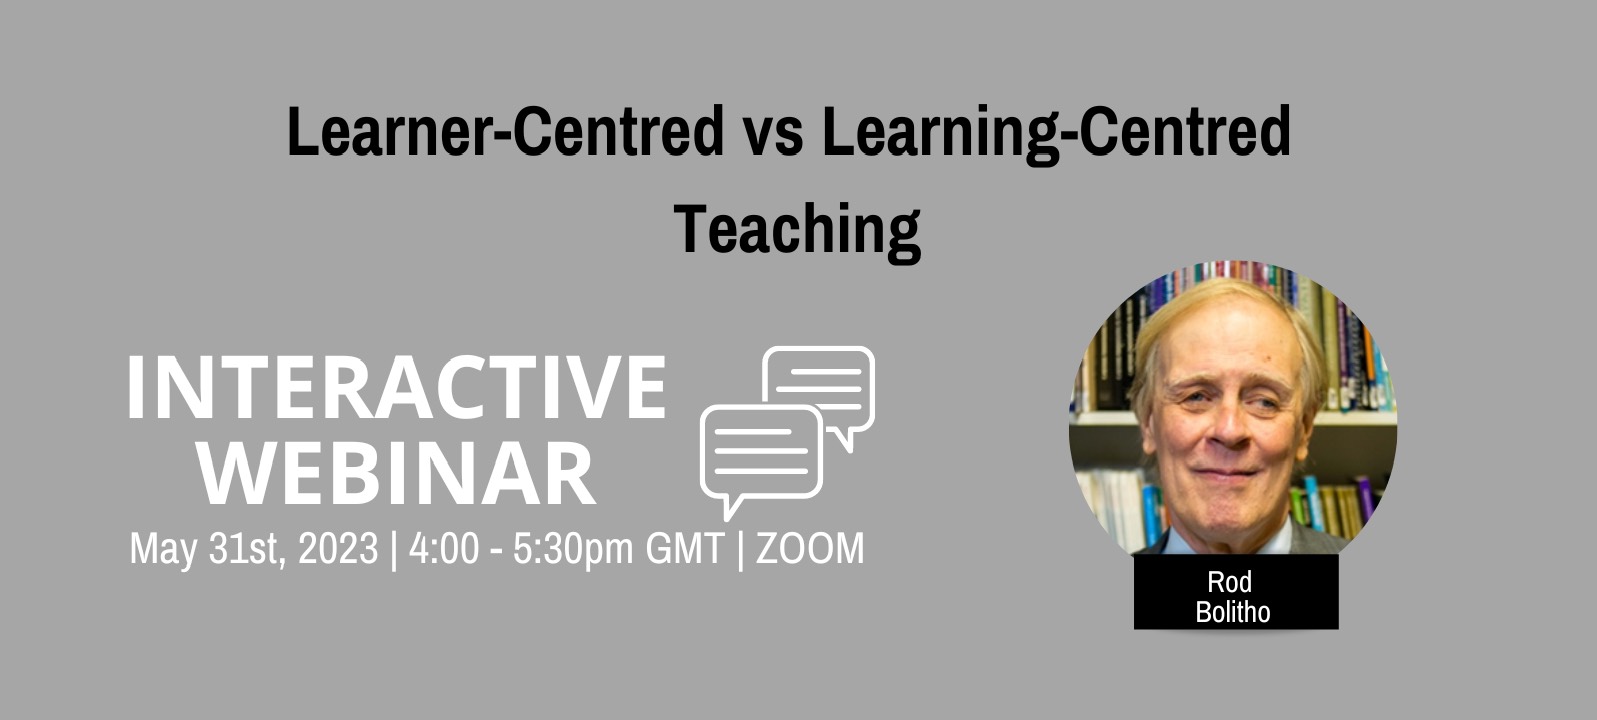 Online webinar – Learner-Centred vs Learning-Centred Teaching with Rod Bolitho